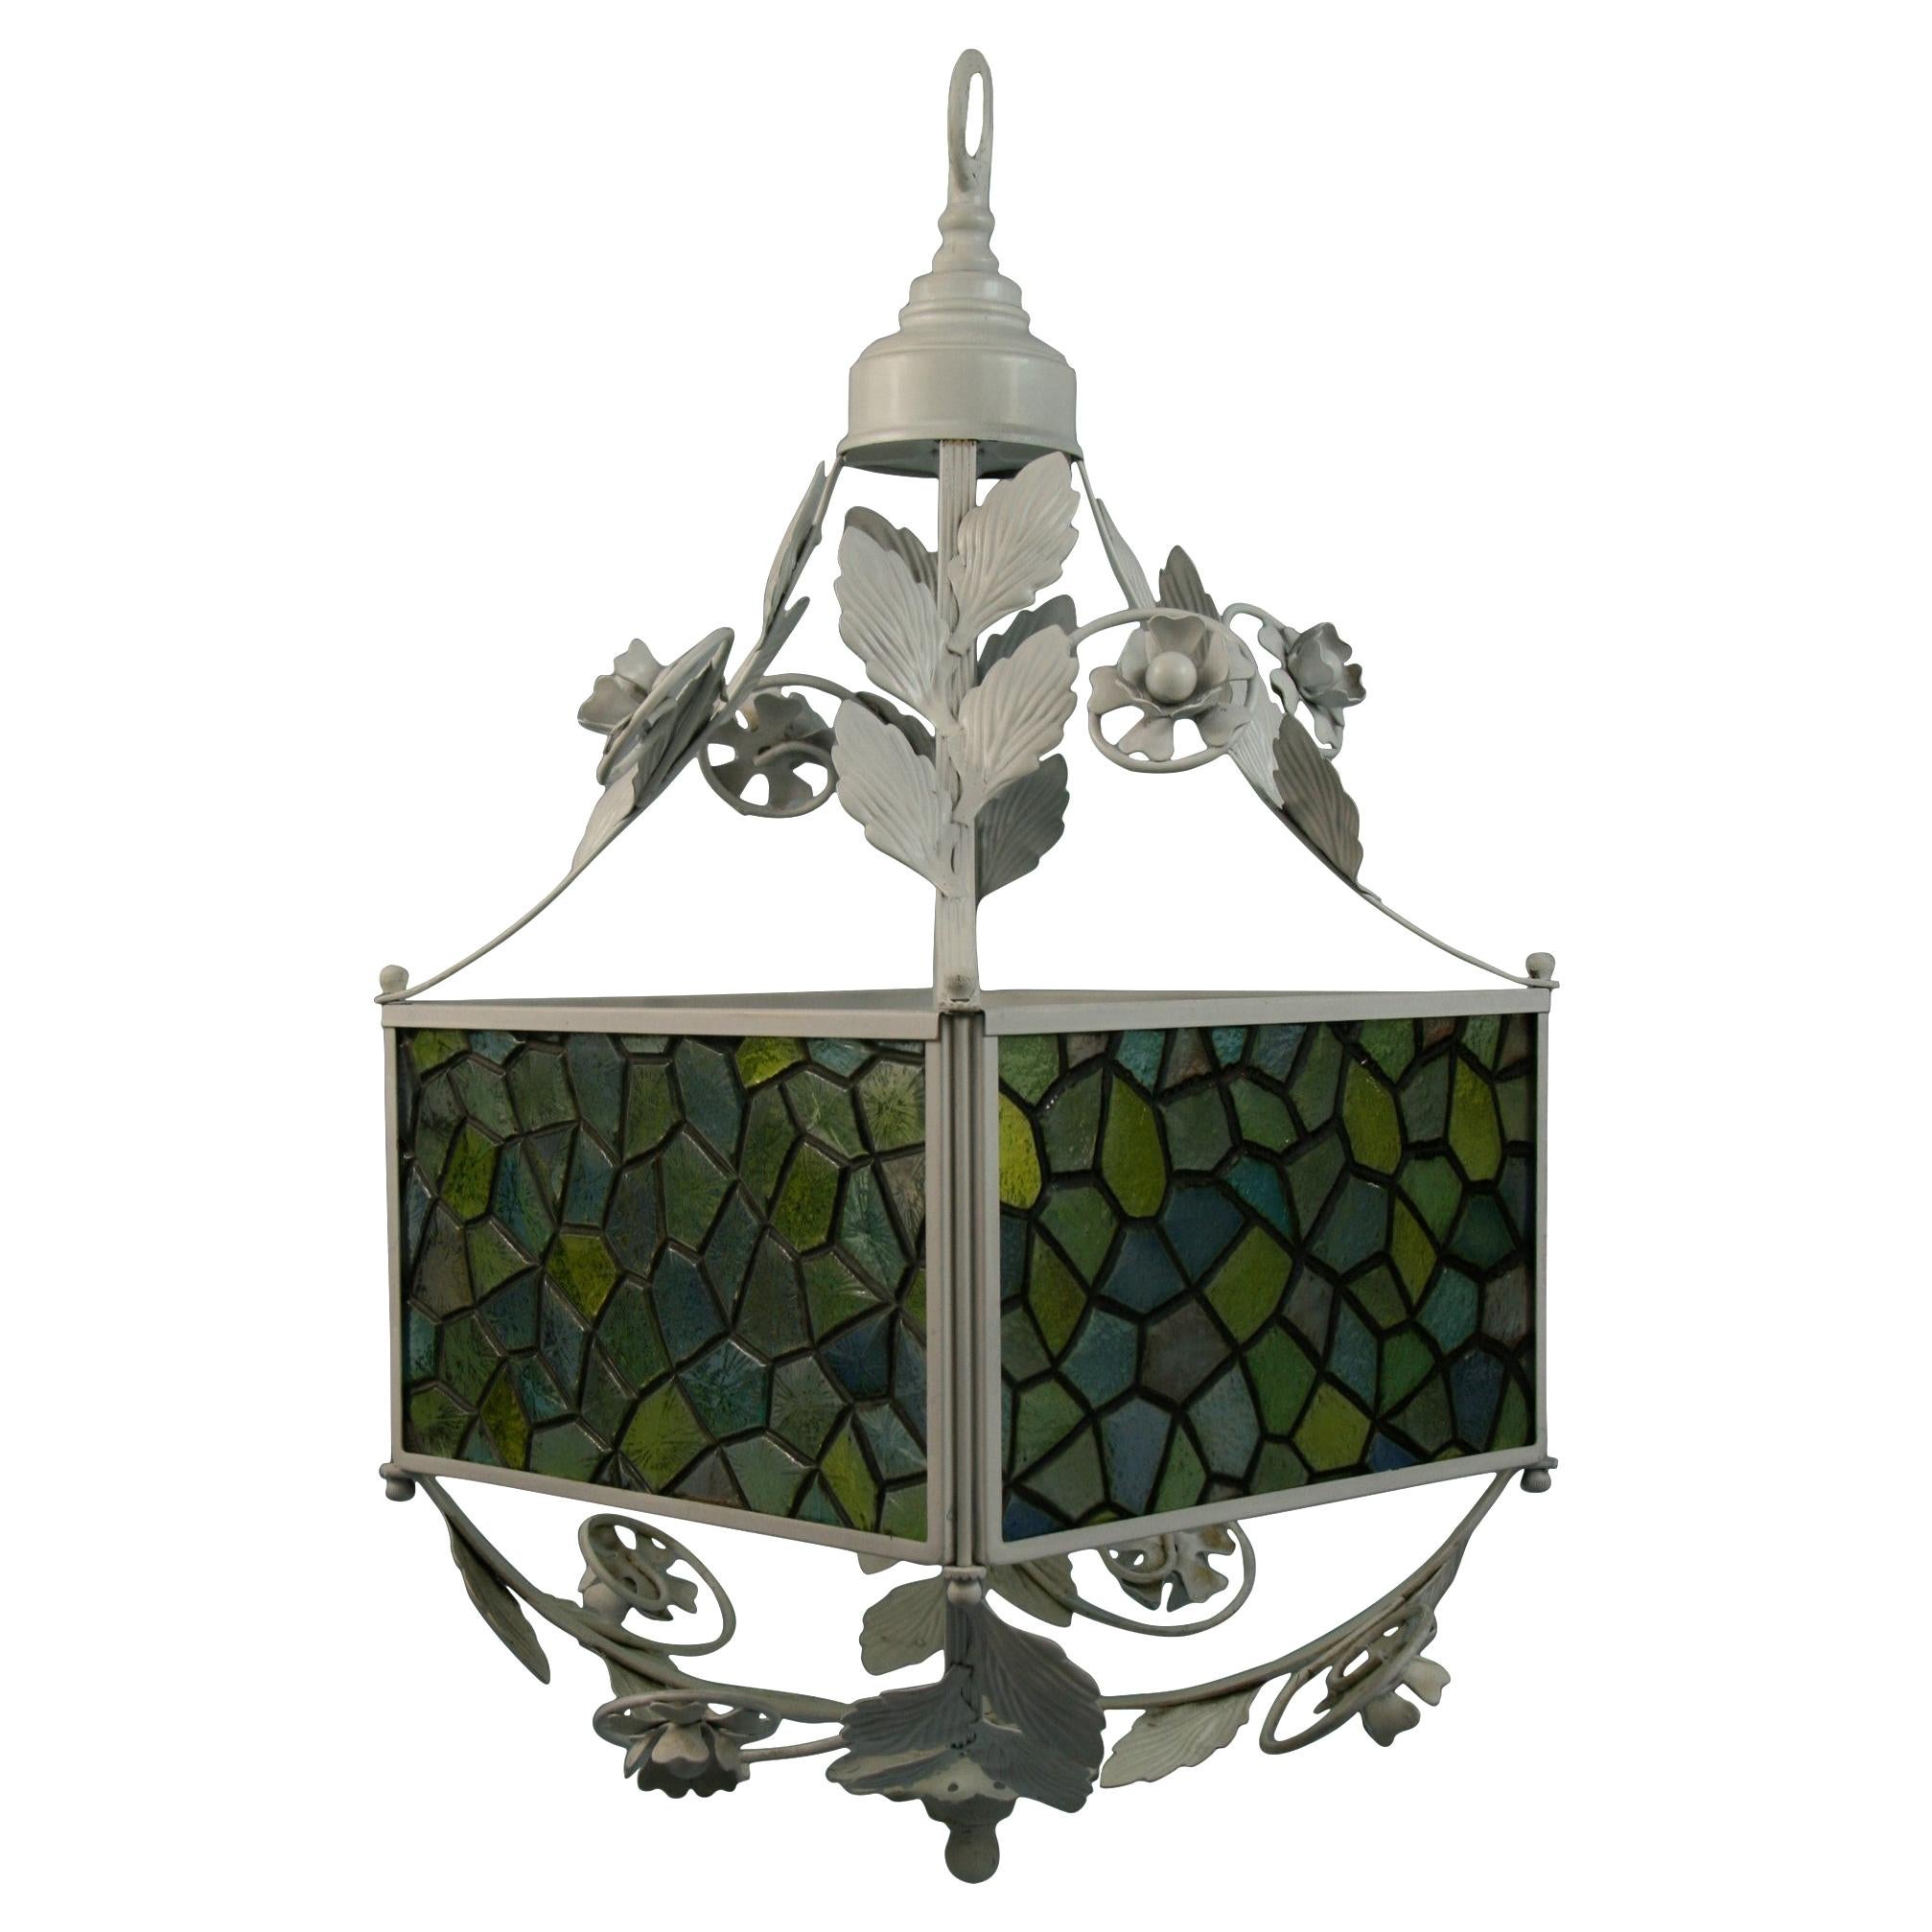 3-514 stain glass panels with white flowers and leaves pendant light
Take one 100 watt Edison based bulb
Height of fixture 20